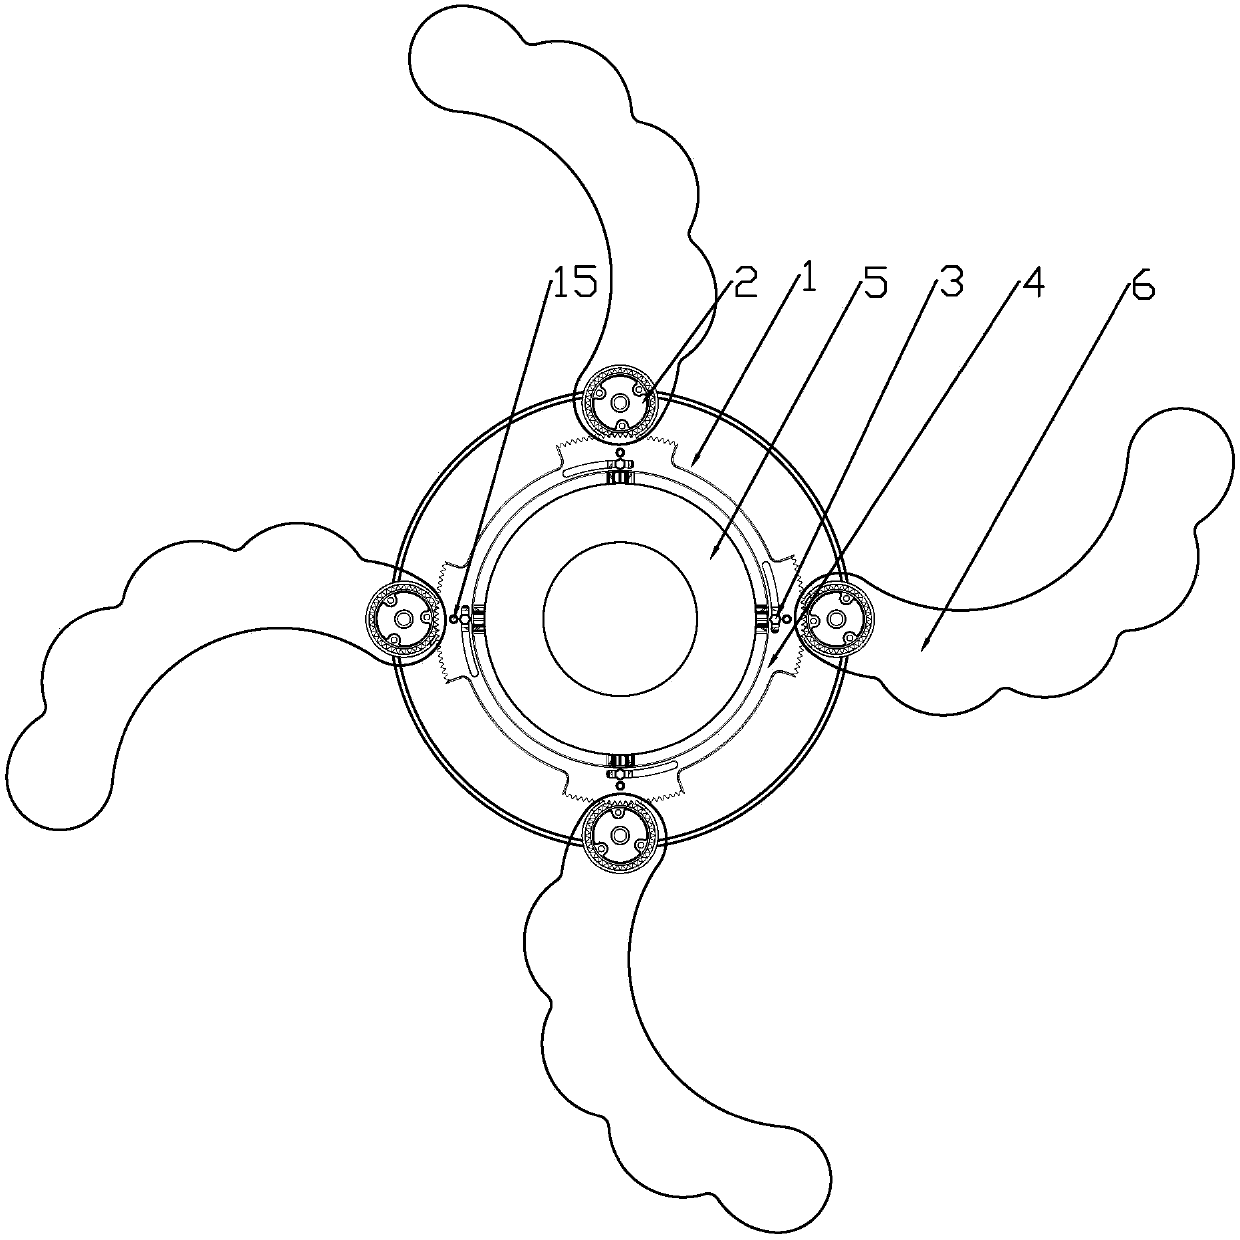 Fan with fan blades capable of being synchronously stored and expanded